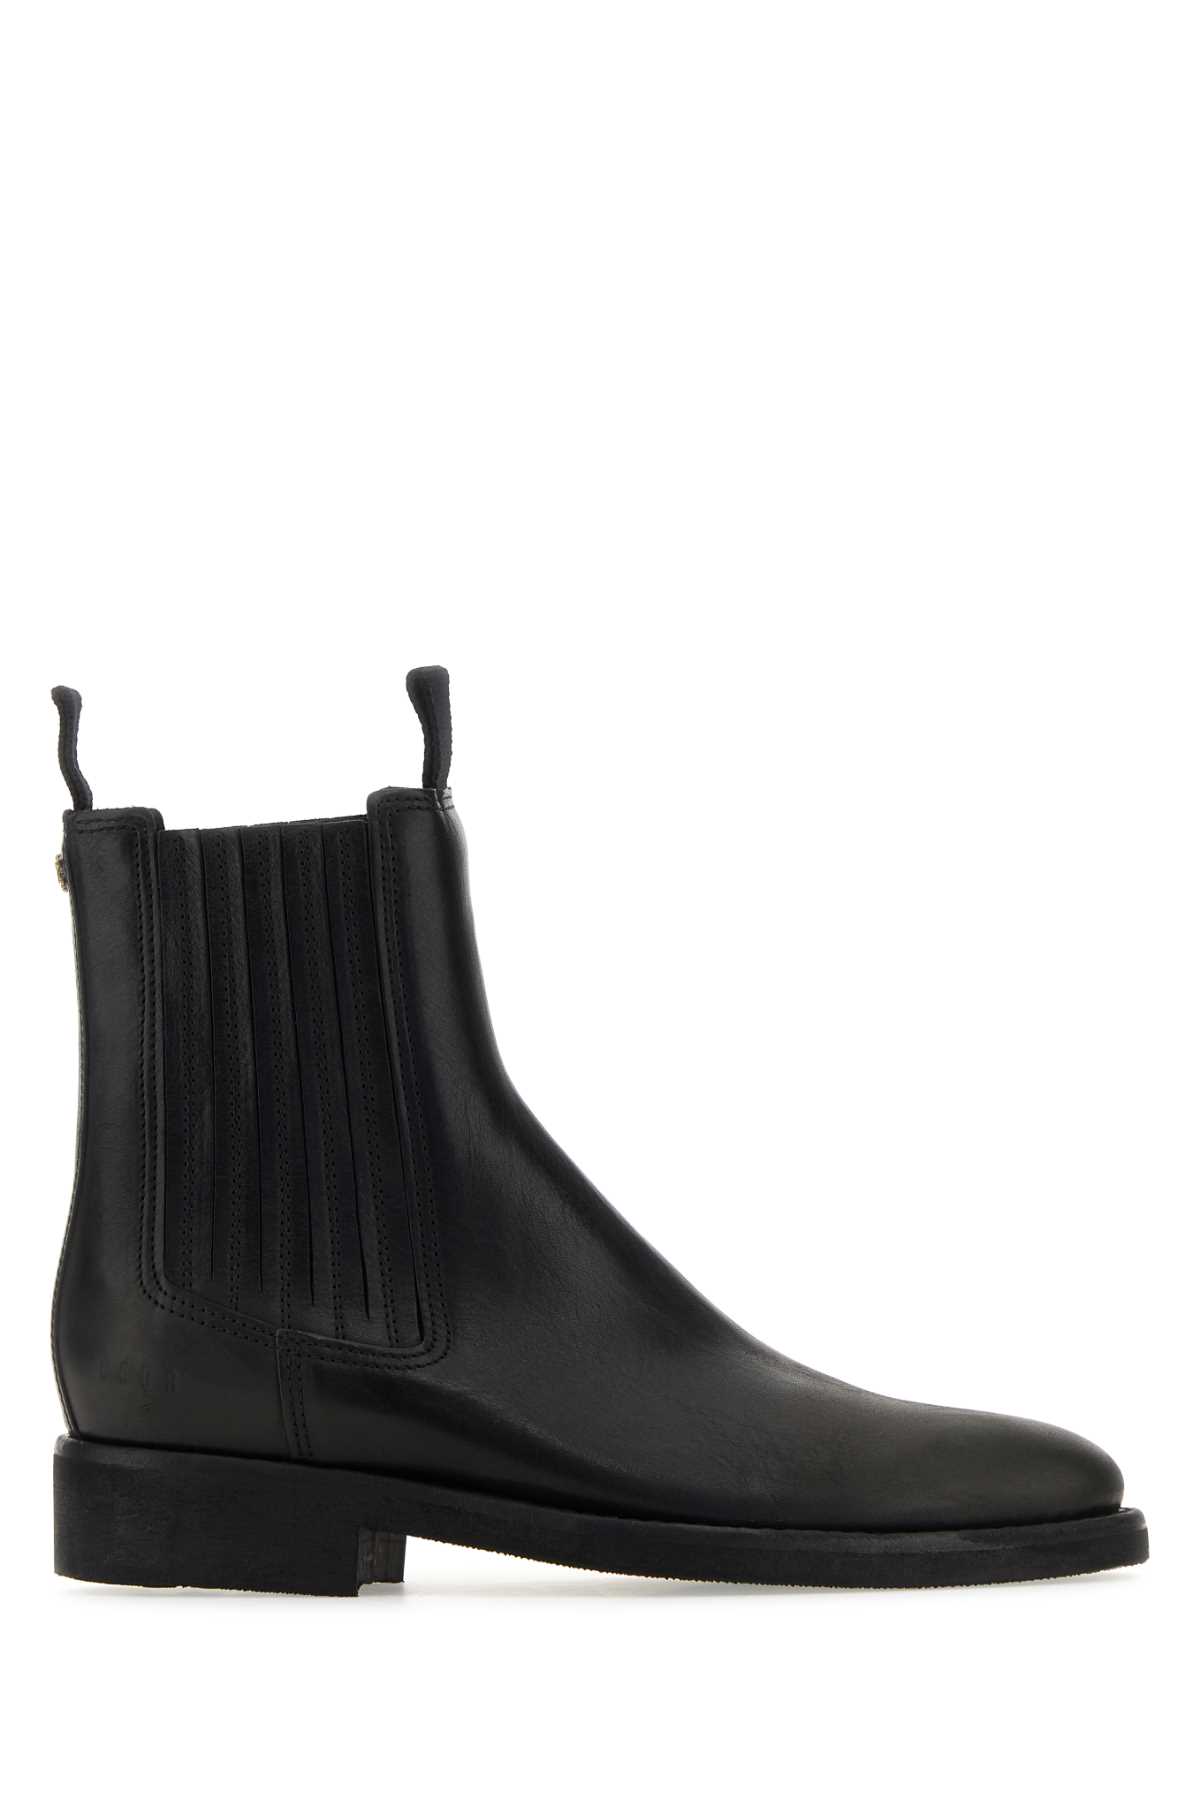 Golden Goose Black Leather Chelsea Ankle Boots